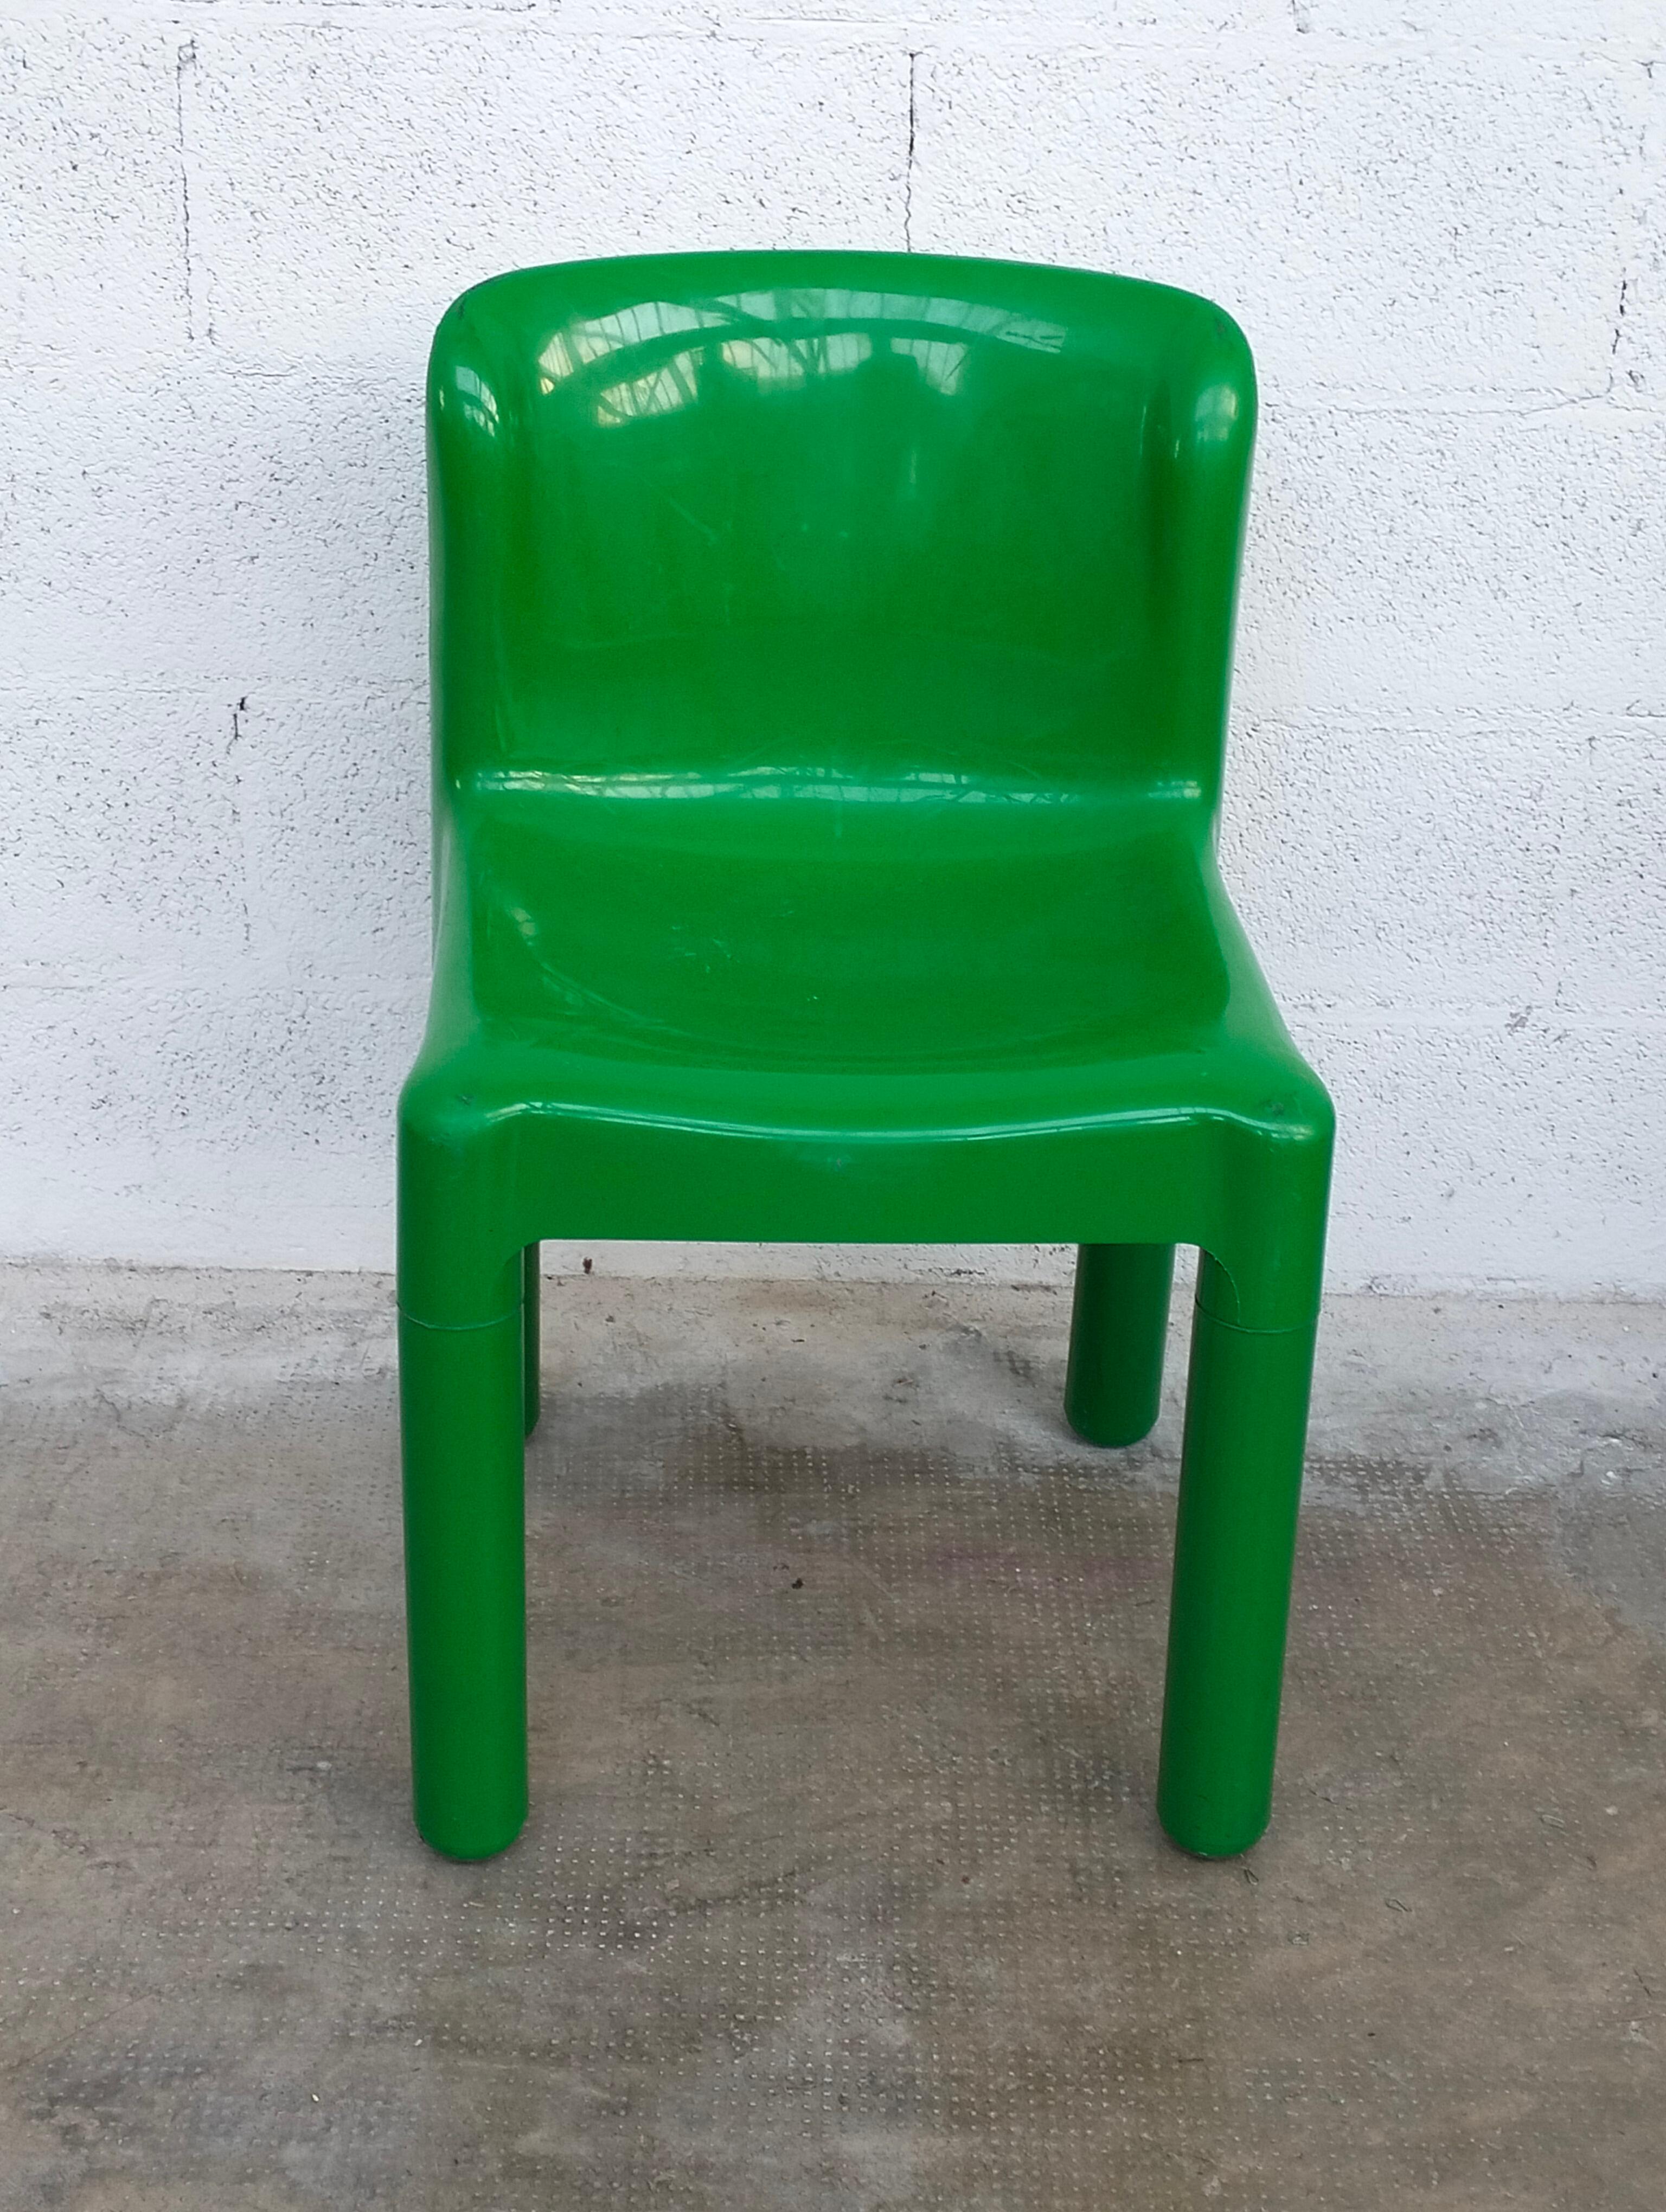 Oustanding and rare set of 6 green plastic chairs 4875 model, designed by Carlo Bartoli and produced by Kartell 1970s. 

In Good condition, wear consistent with age and use.

Dimensions: L 44 cm - D 42 - H 74/43.